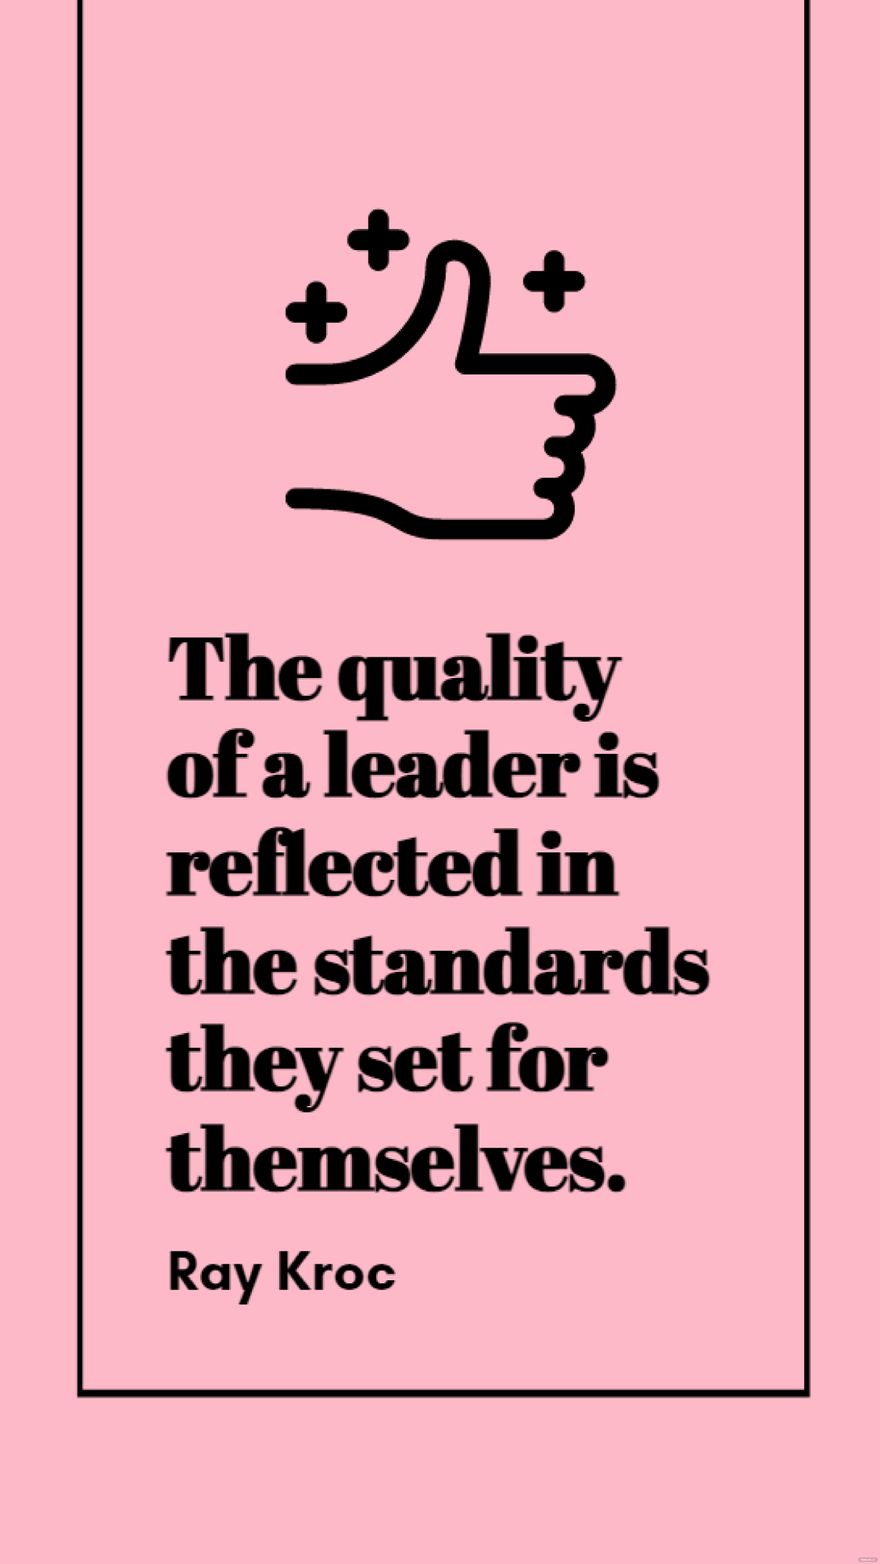 Ray Kroc - The quality of a leader is reflected in the standards they set for themselves.